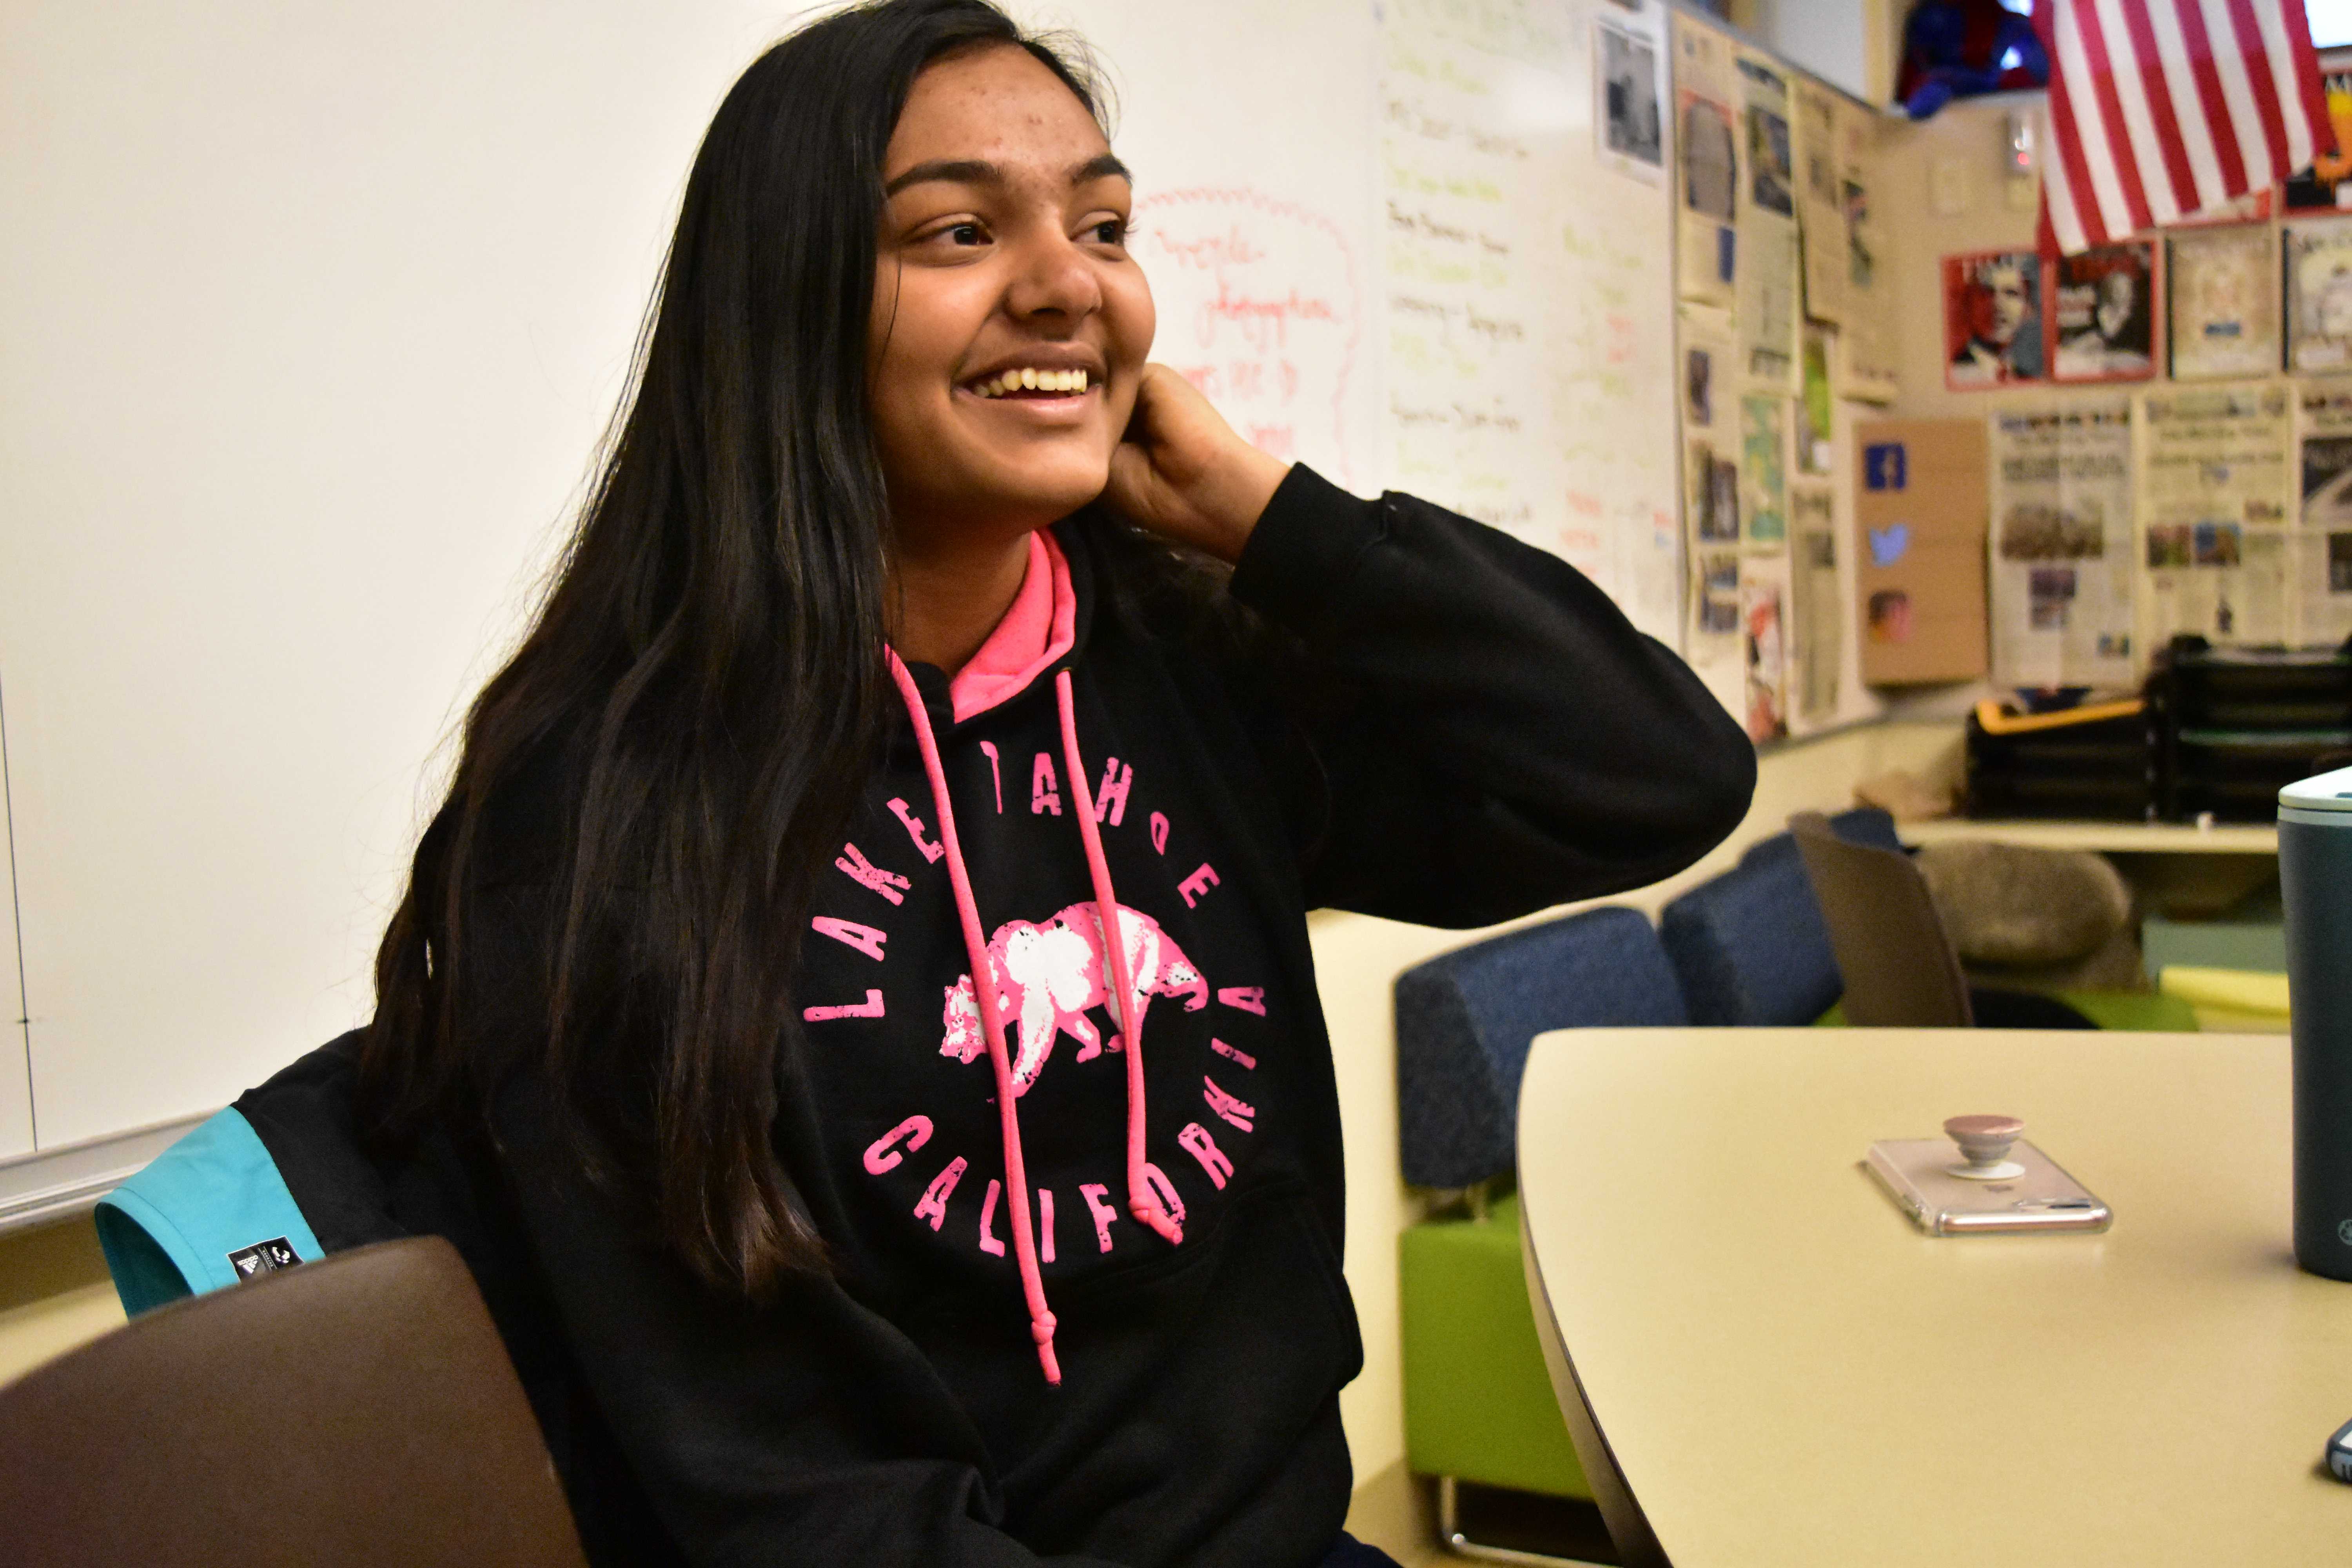 Junior Riya Sinha reflects on her website Fuzia, which encourages women worldwide to share their passions. "We want to connect different people from around the world," Sinha said.